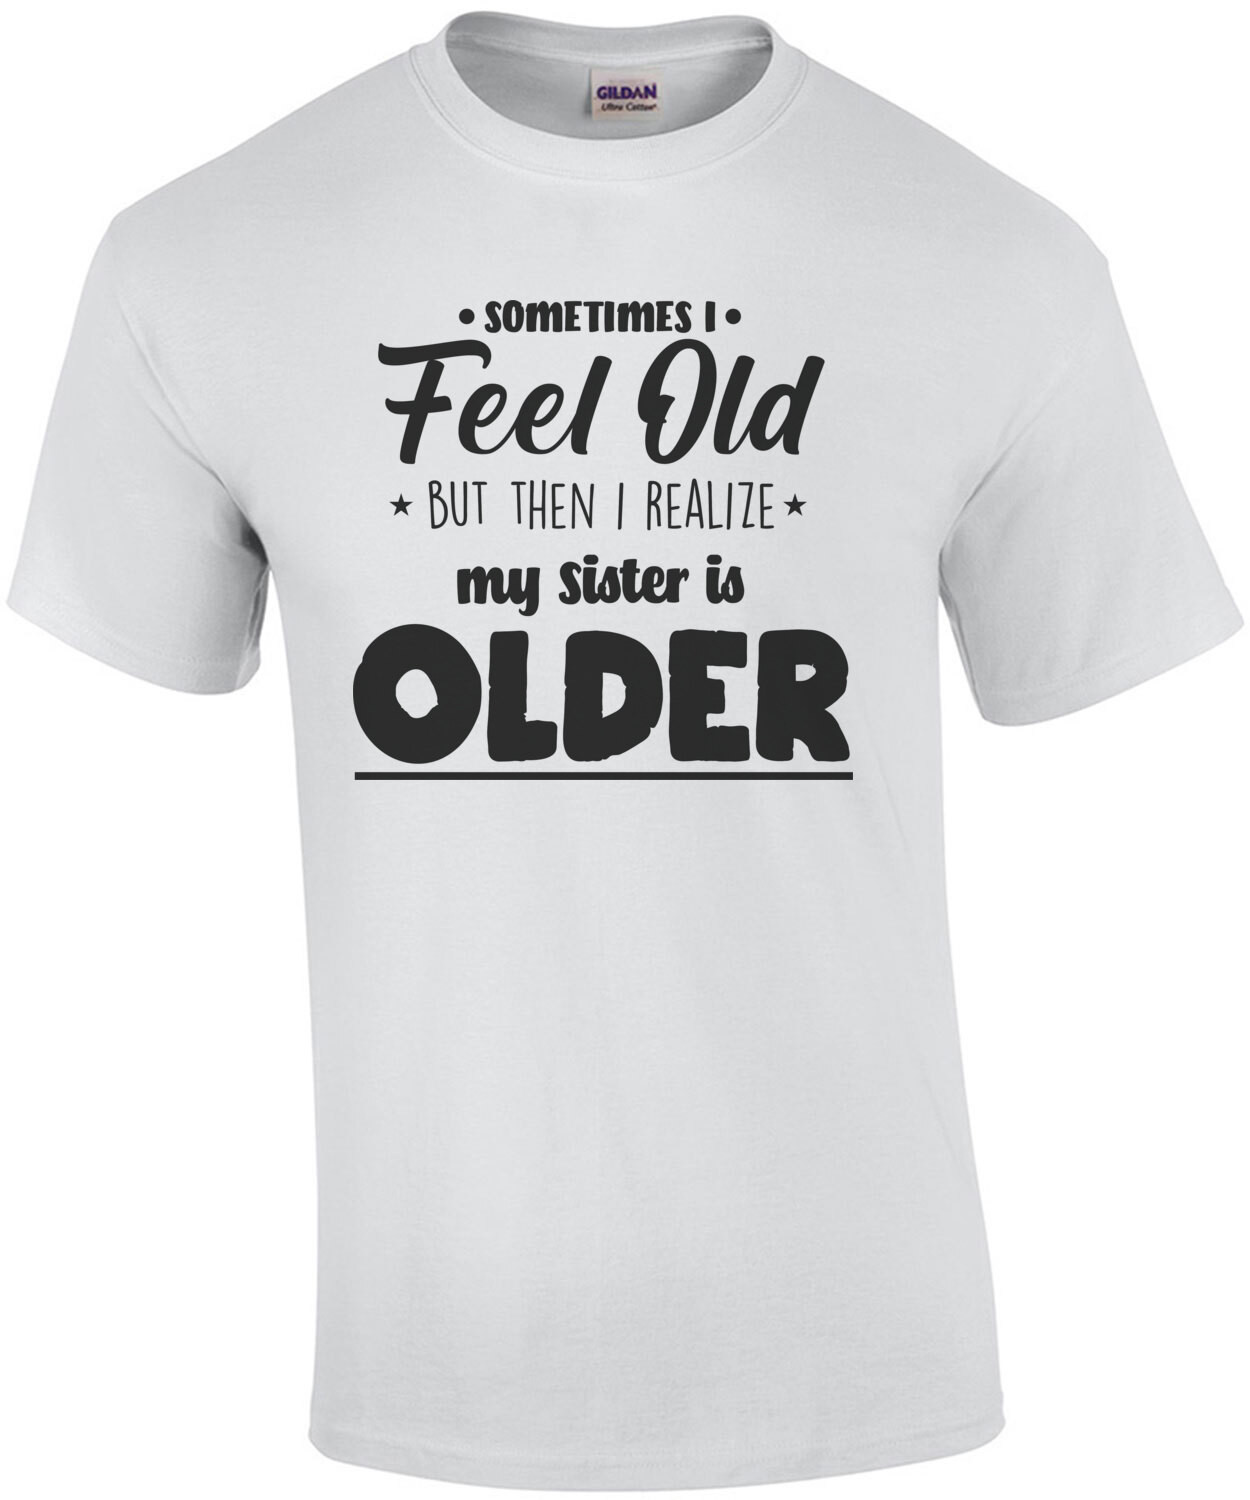 Sometimes I feel old but then I realize my sister is older - funny sister t-shirt